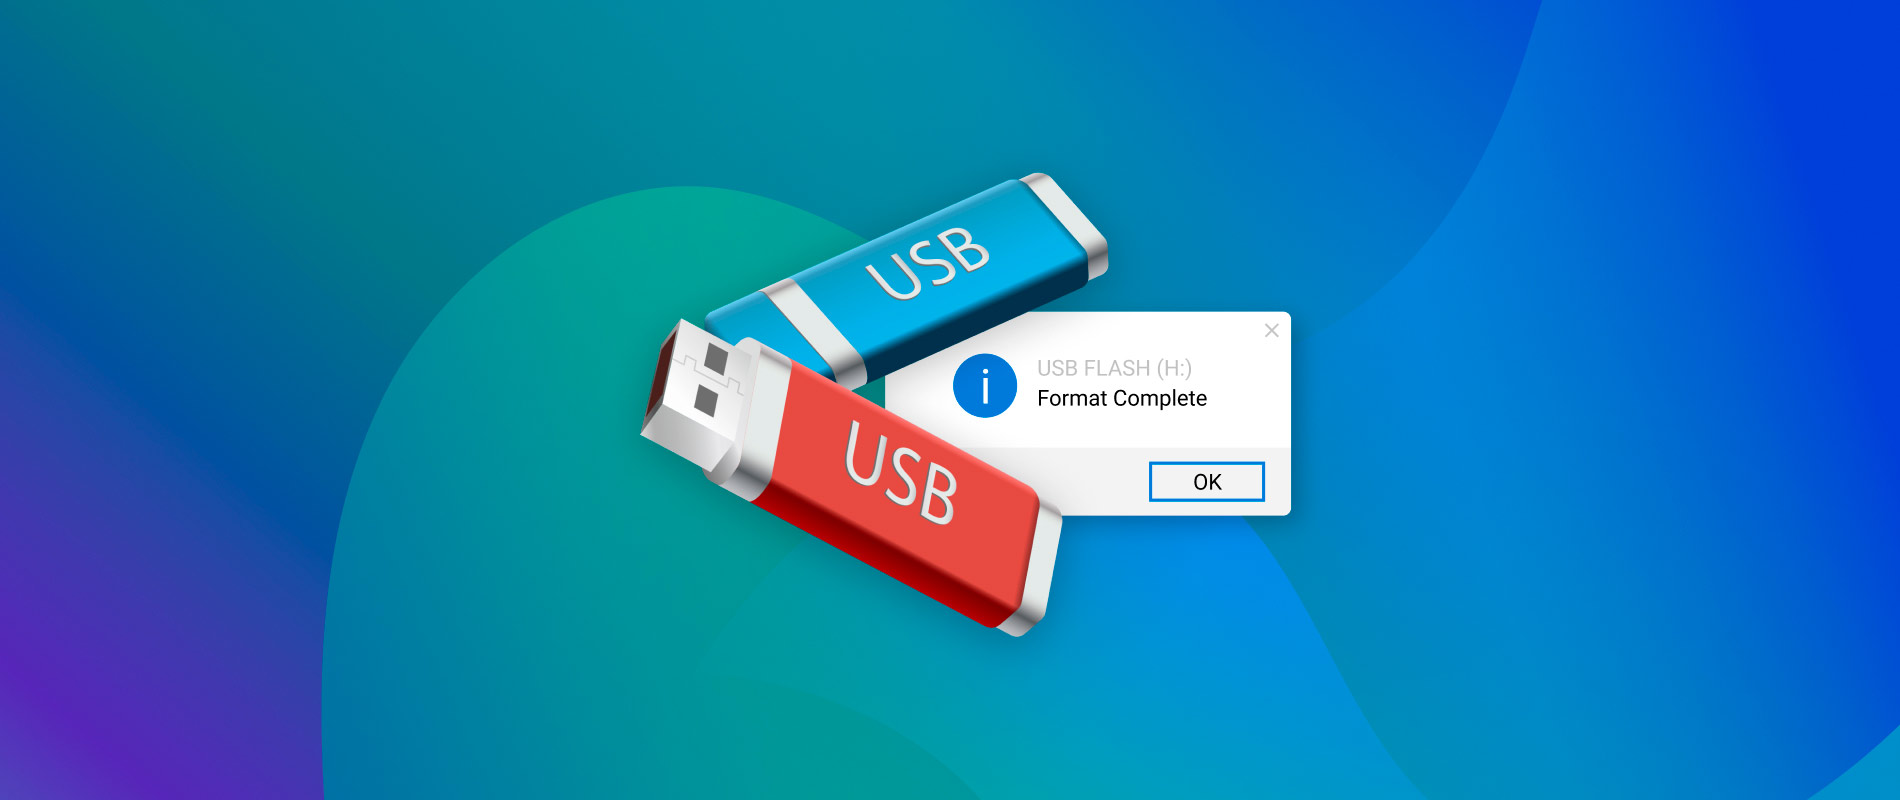 Backing Up Files: It is important to regularly back up all important data to prevent loss in case of a technical error or malfunction. This can be done by using cloud storage services or external storage devices like USB flash drives.
Unformatted USB Flash Drives: If a USB flash drive is not formatted, it can lead to data loss or corruption. This can happen due to improper removal, virus attacks, or system errors.